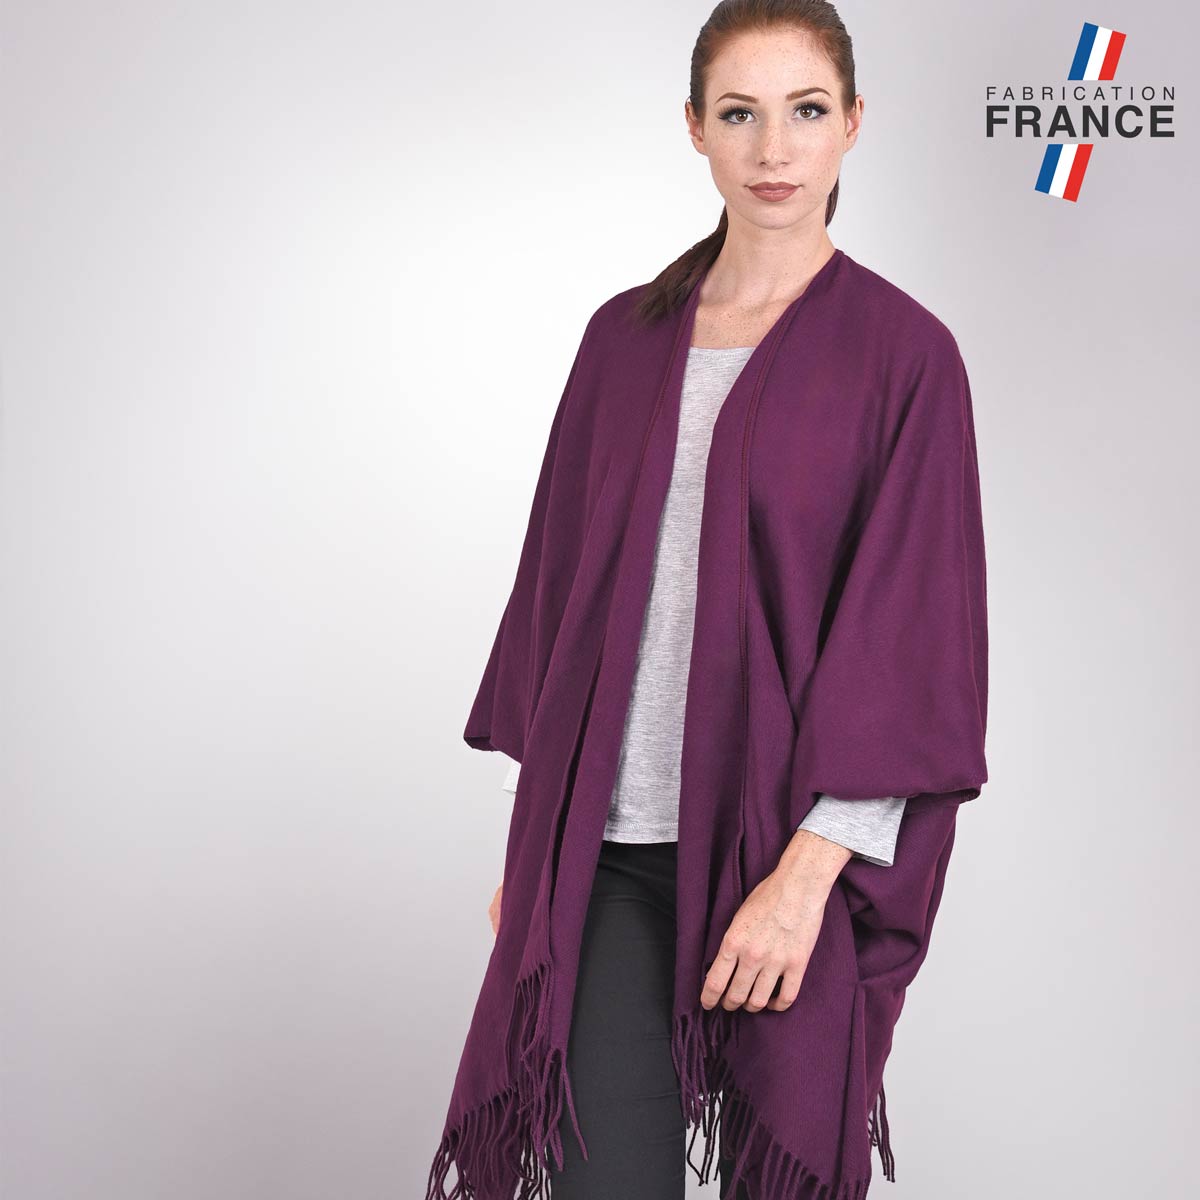 Poncho-chaud-violet-fabrication-francaise--AT-04792_W1-12FR